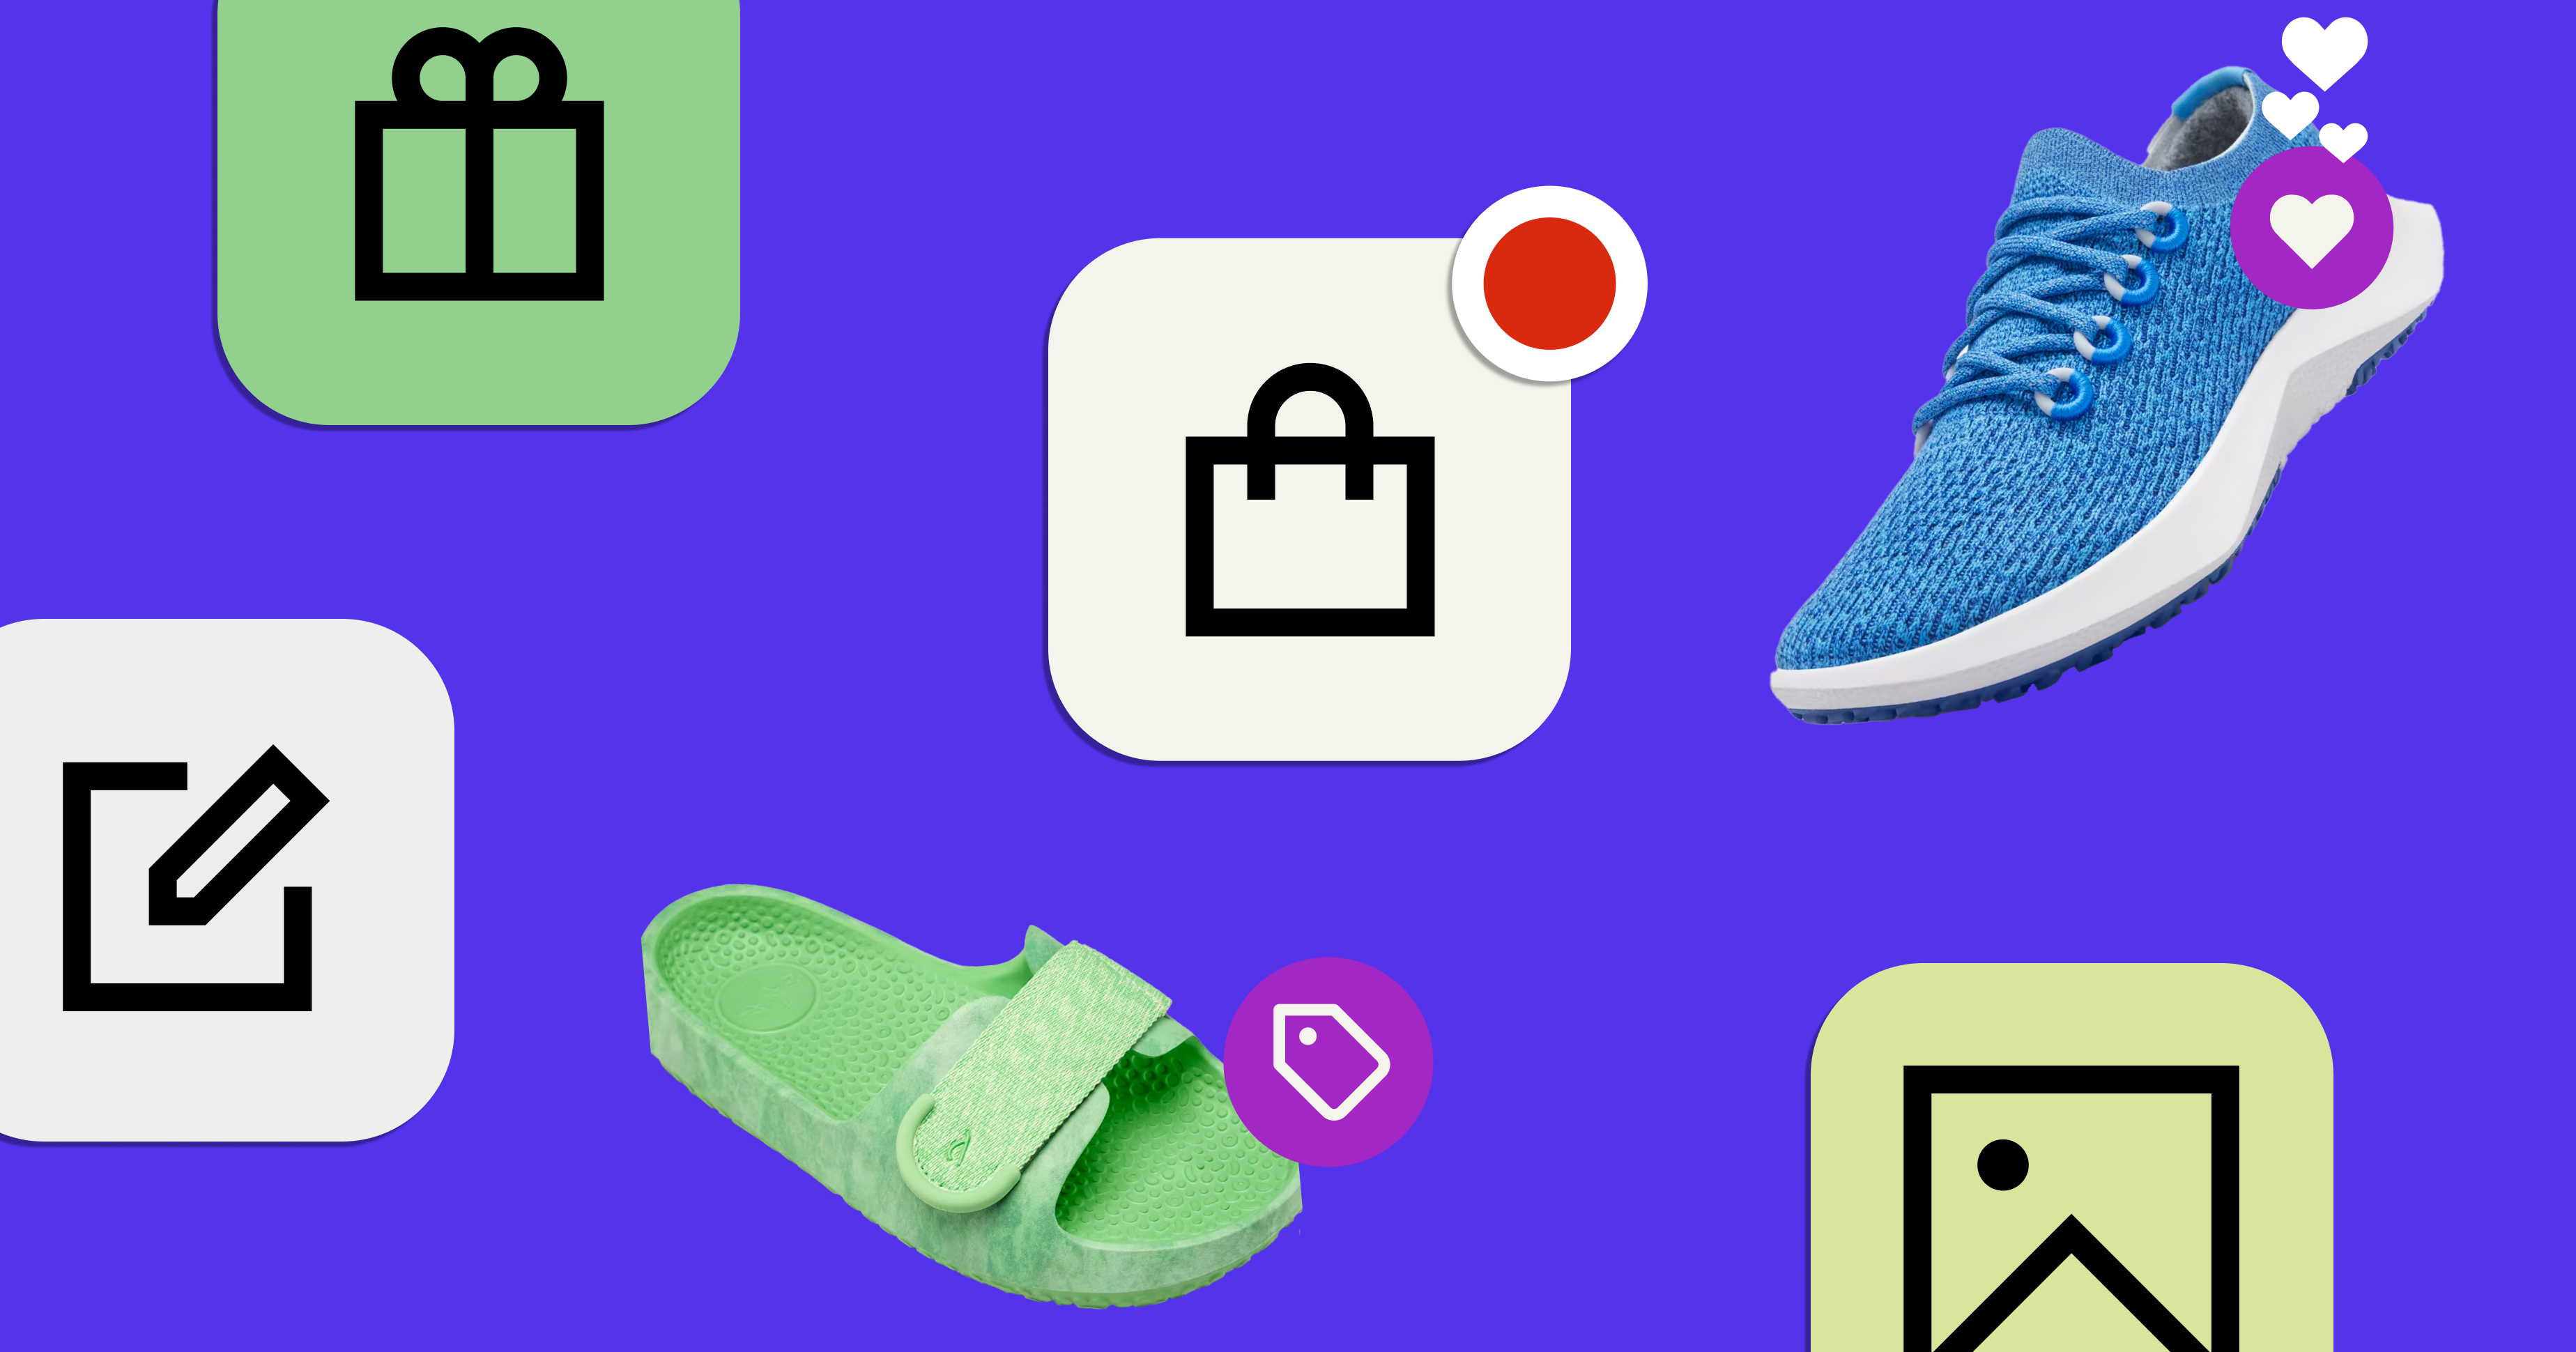 mobile app icons and shoes on a purple background